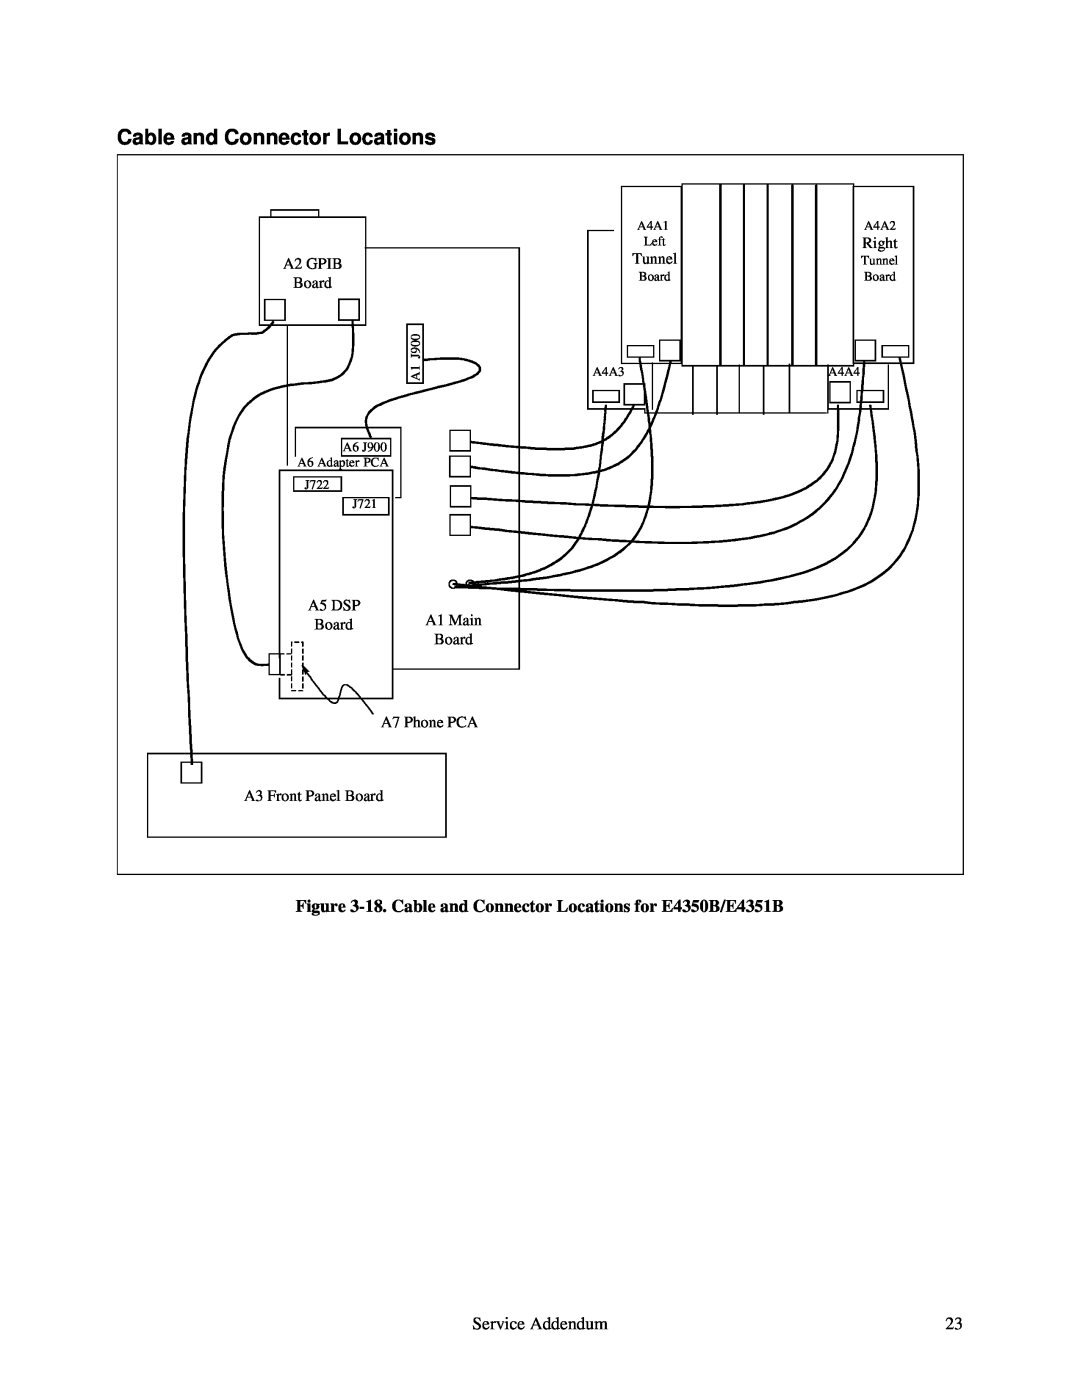 Agilent Technologies service manual 18. Cable and Connector Locations for E4350B/E4351B 